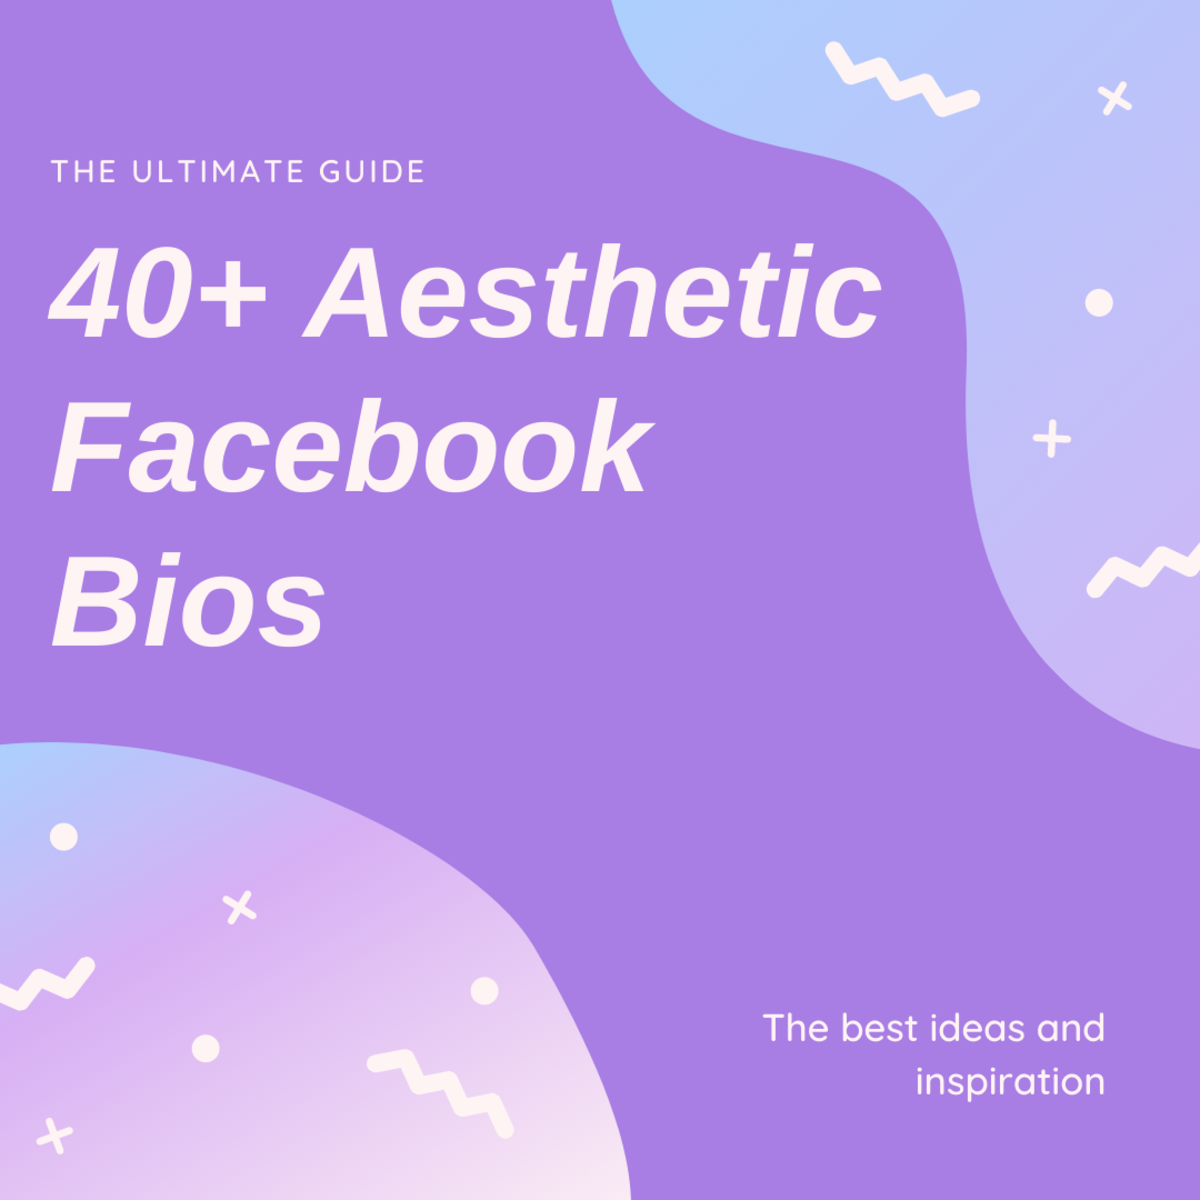 Discover over 40 aesthetic Facebook bios and ideas within this ultimate list!